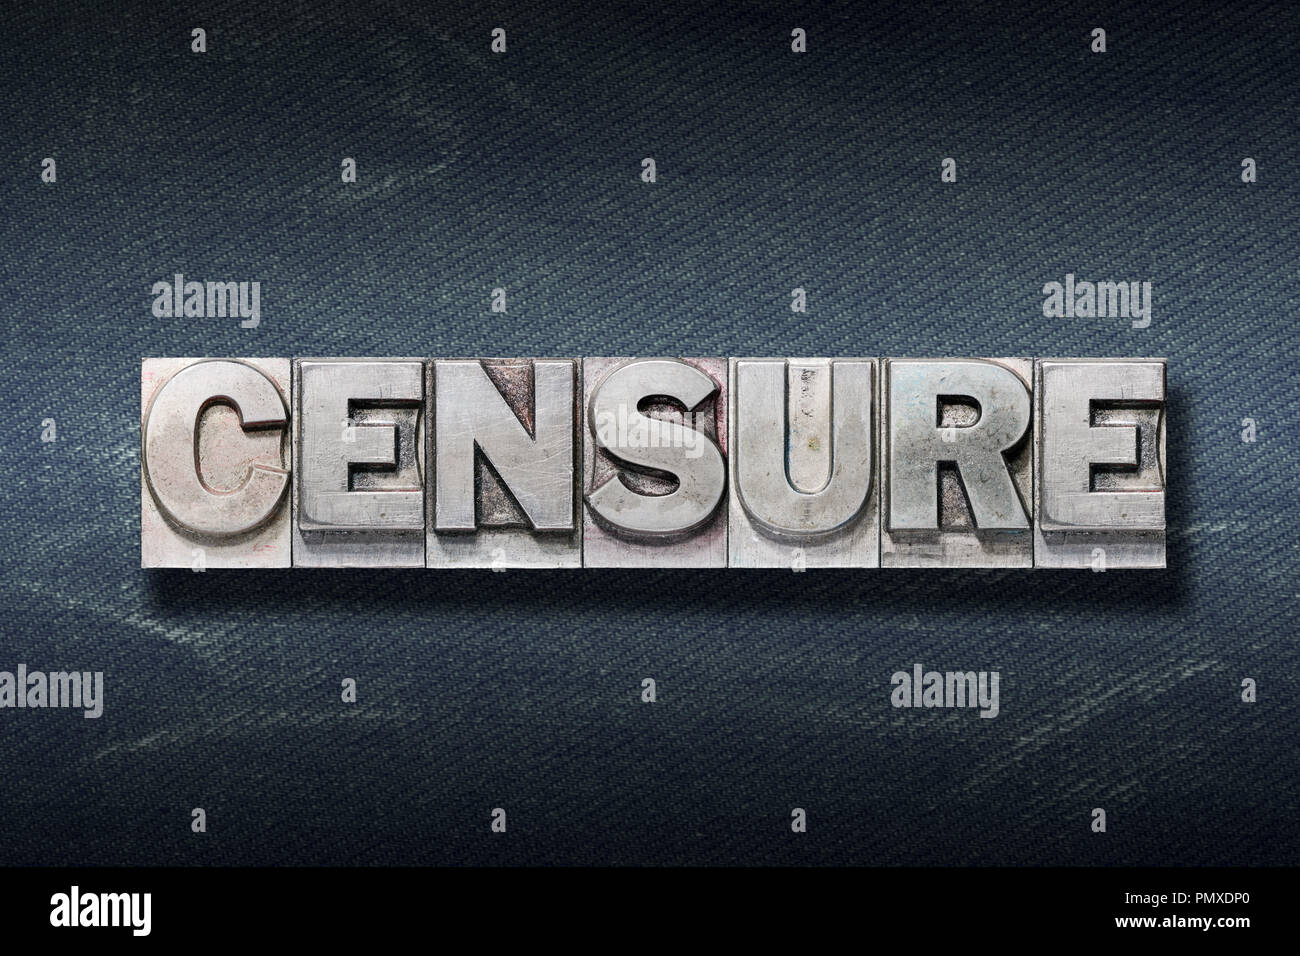 censure word made from metallic letterpress on dark jeans background Stock Photo